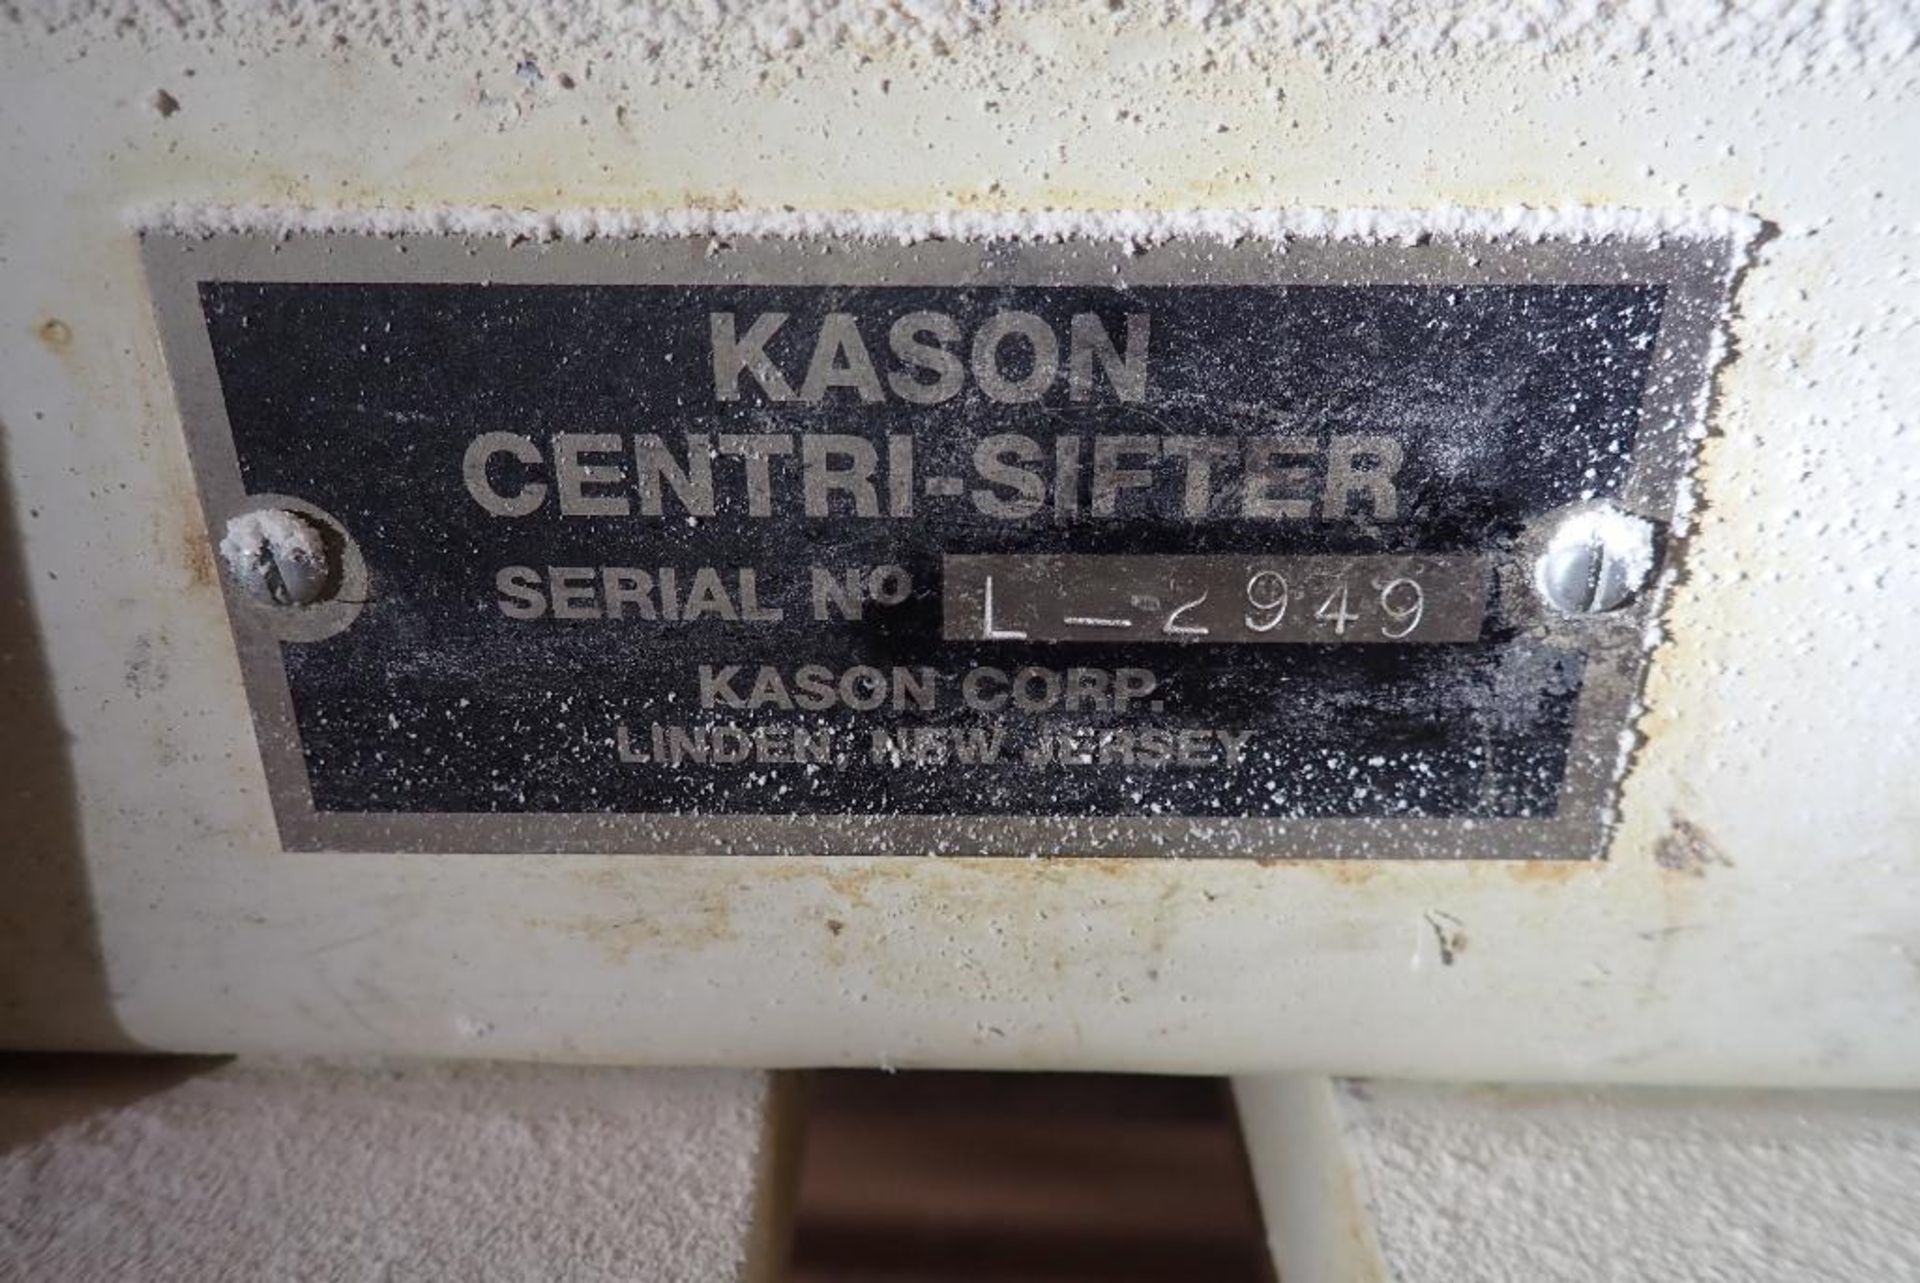 Kason central sifter package - Image 9 of 12